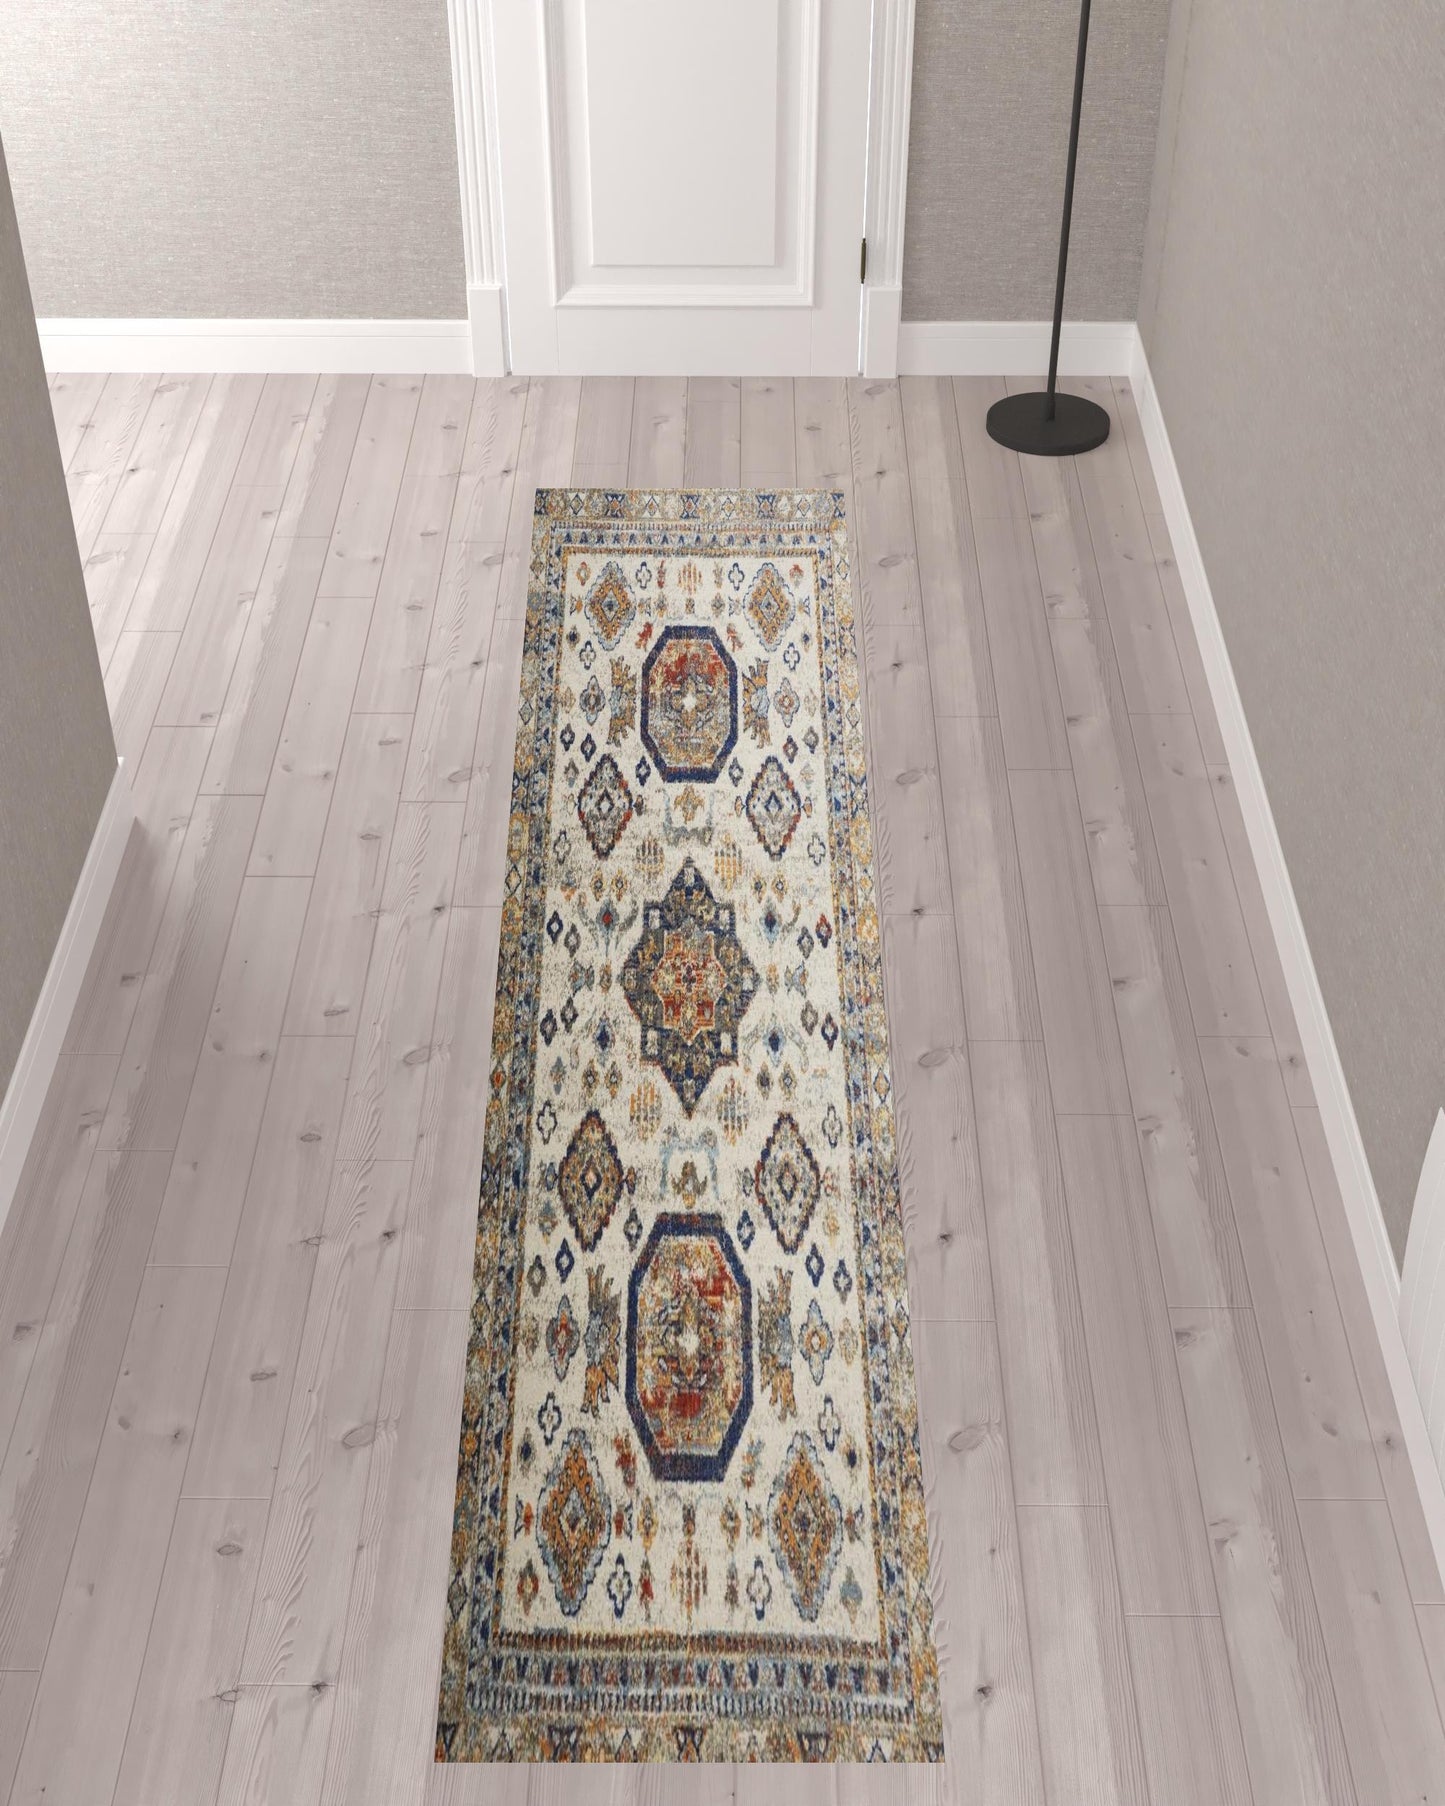 8' Gray Brown And Blue Round Floral Stain Resistant Area Rug